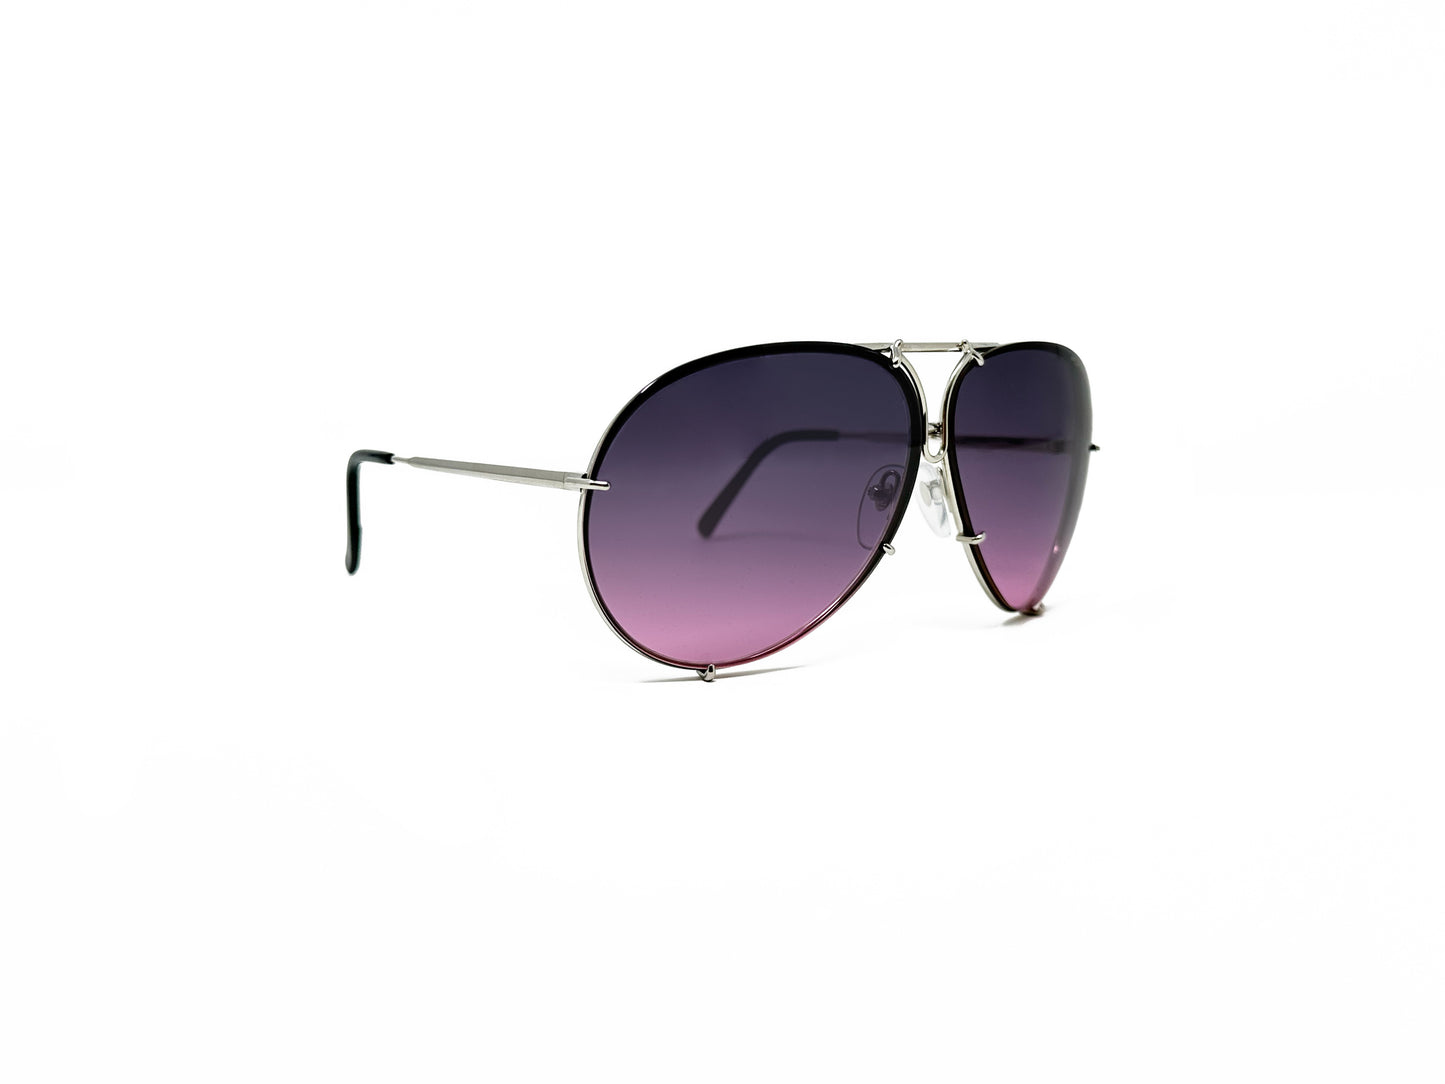 Porsche Design aviator style sunglass. Model: P8478. Color M Silver with purple to pink gradient lens. Side view.